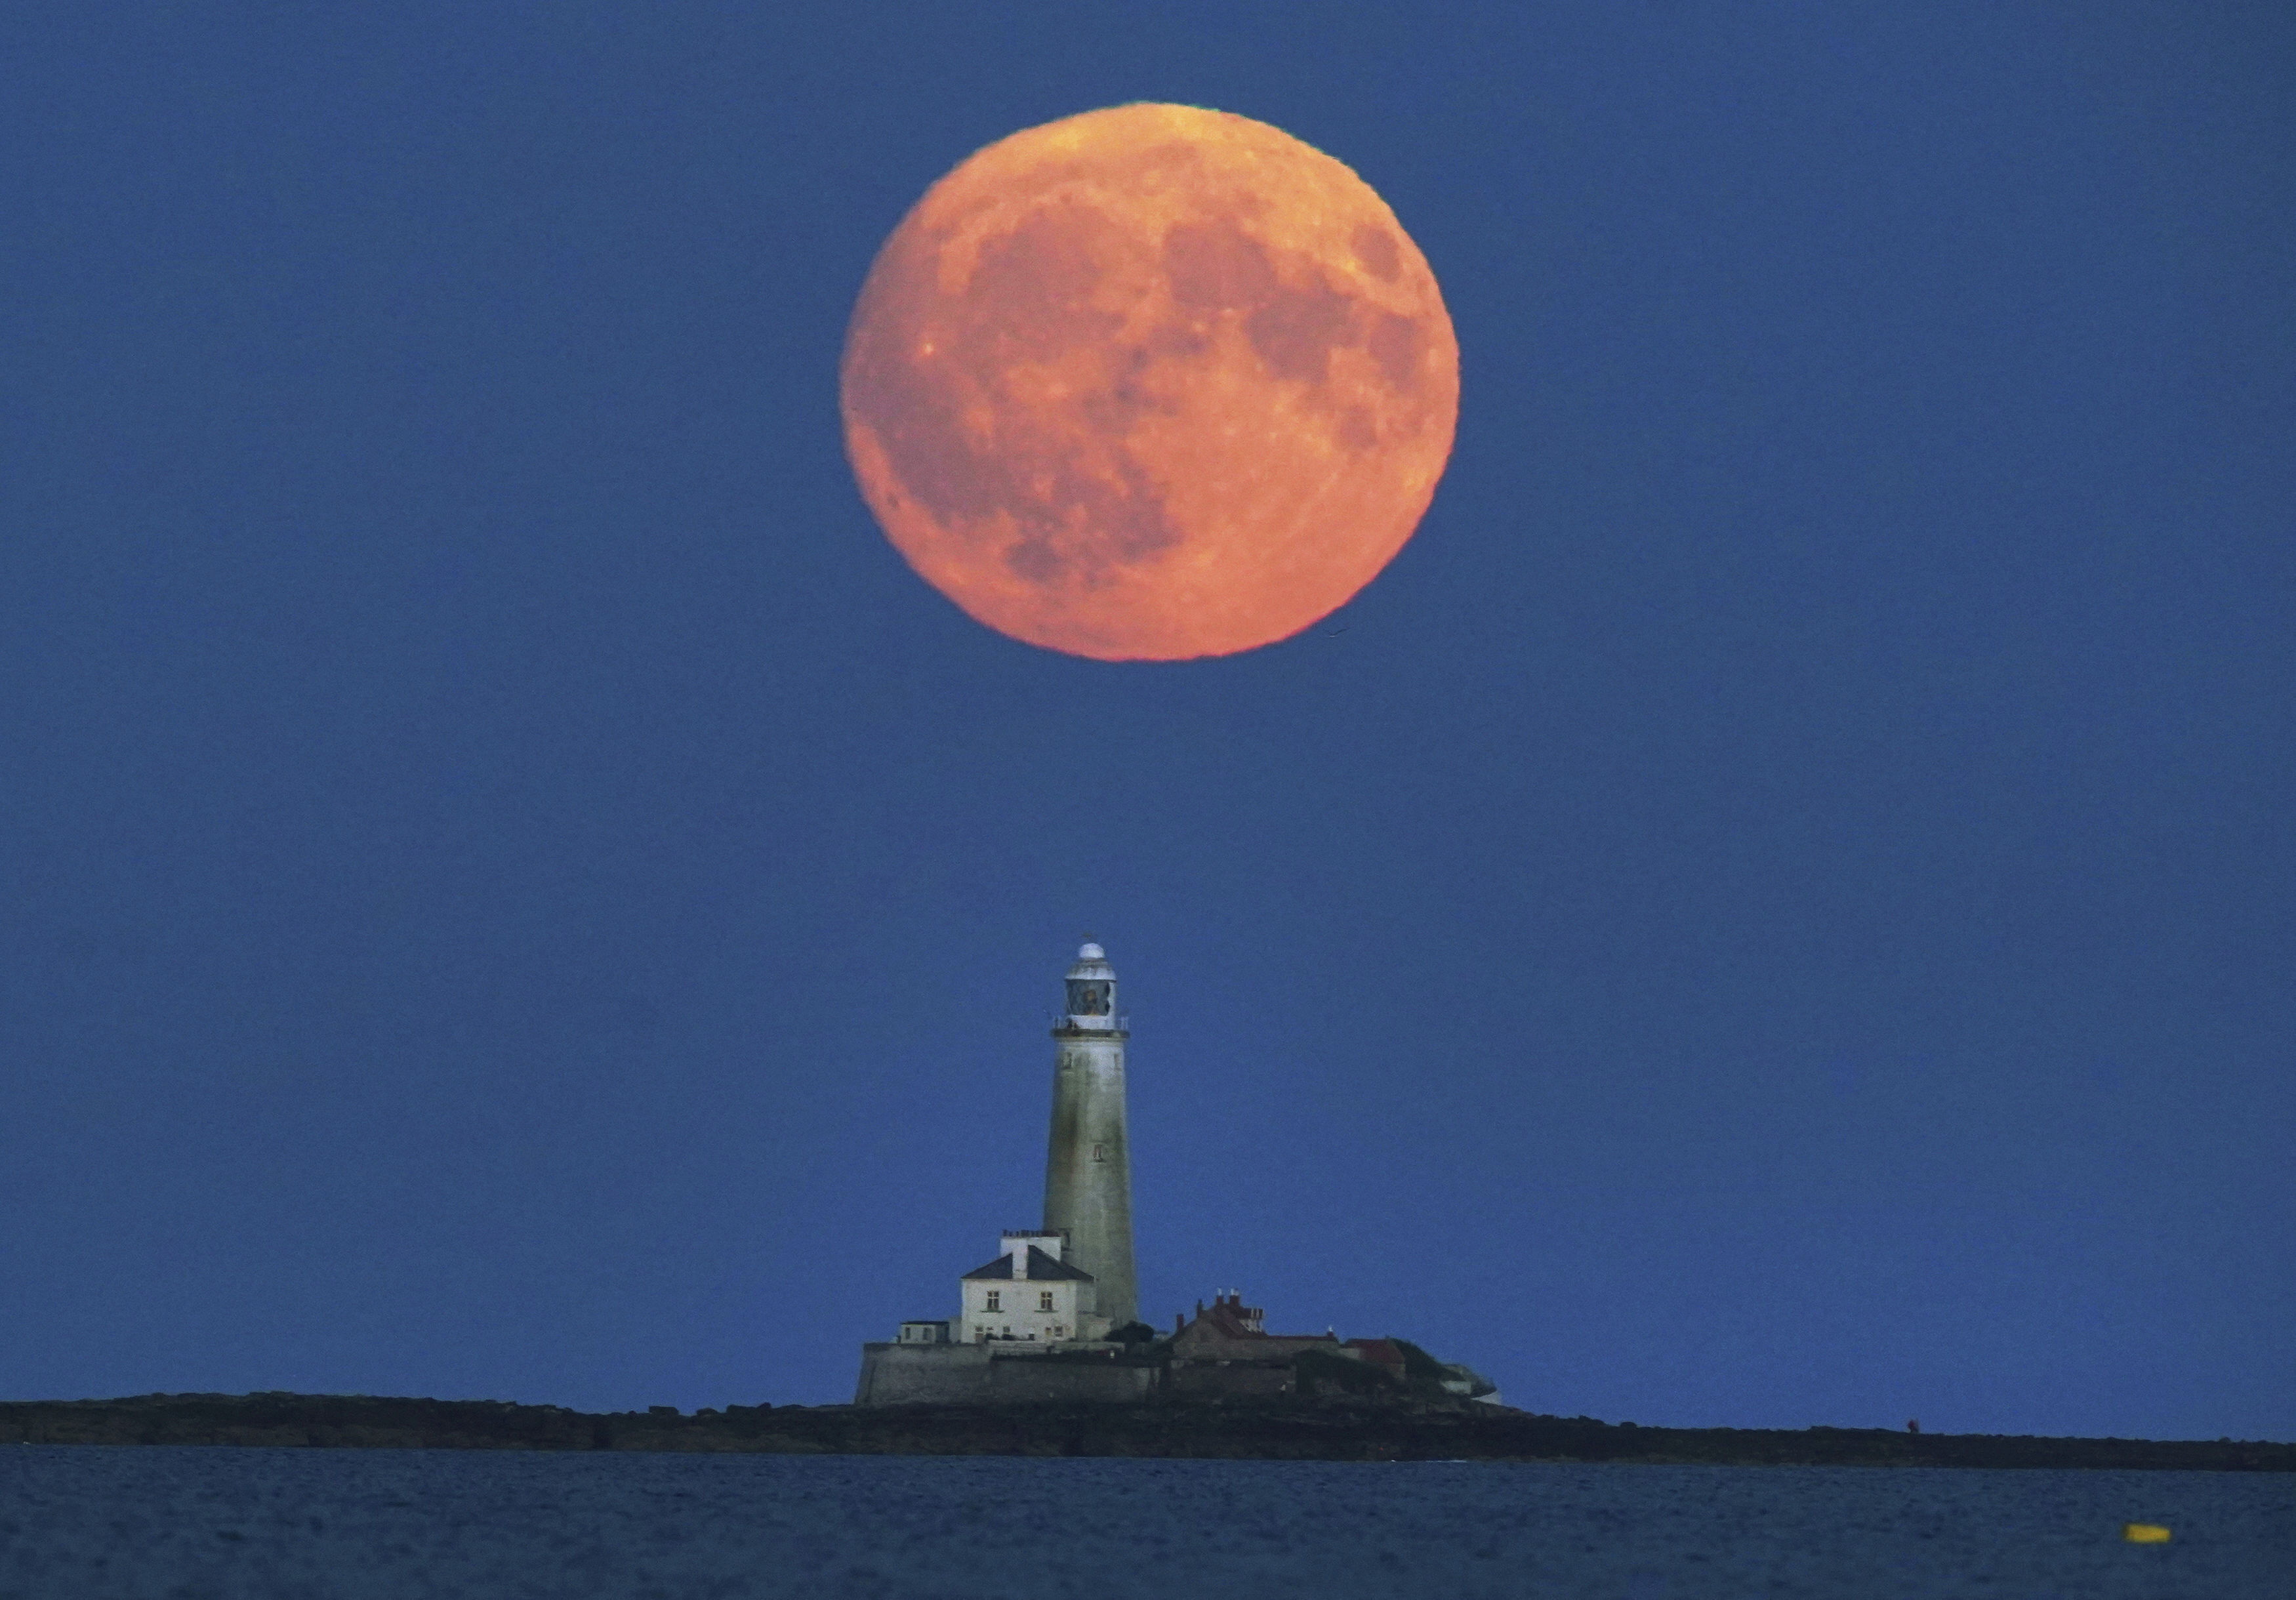 A large orange moon rises over a lighthouse sitting on a shallow rise.